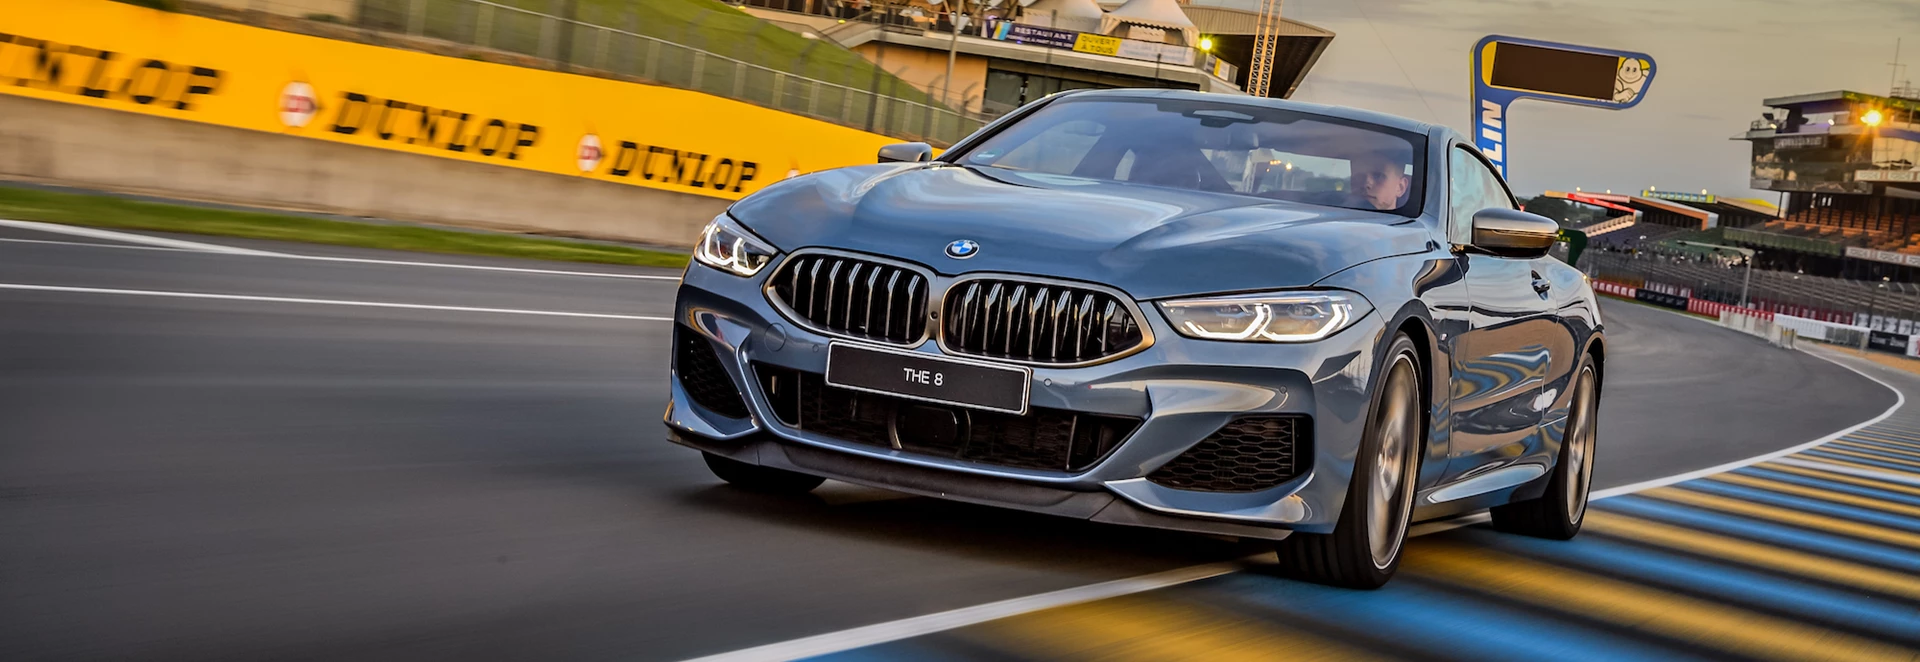 2018 BMW 8 Series: Old vs New compared